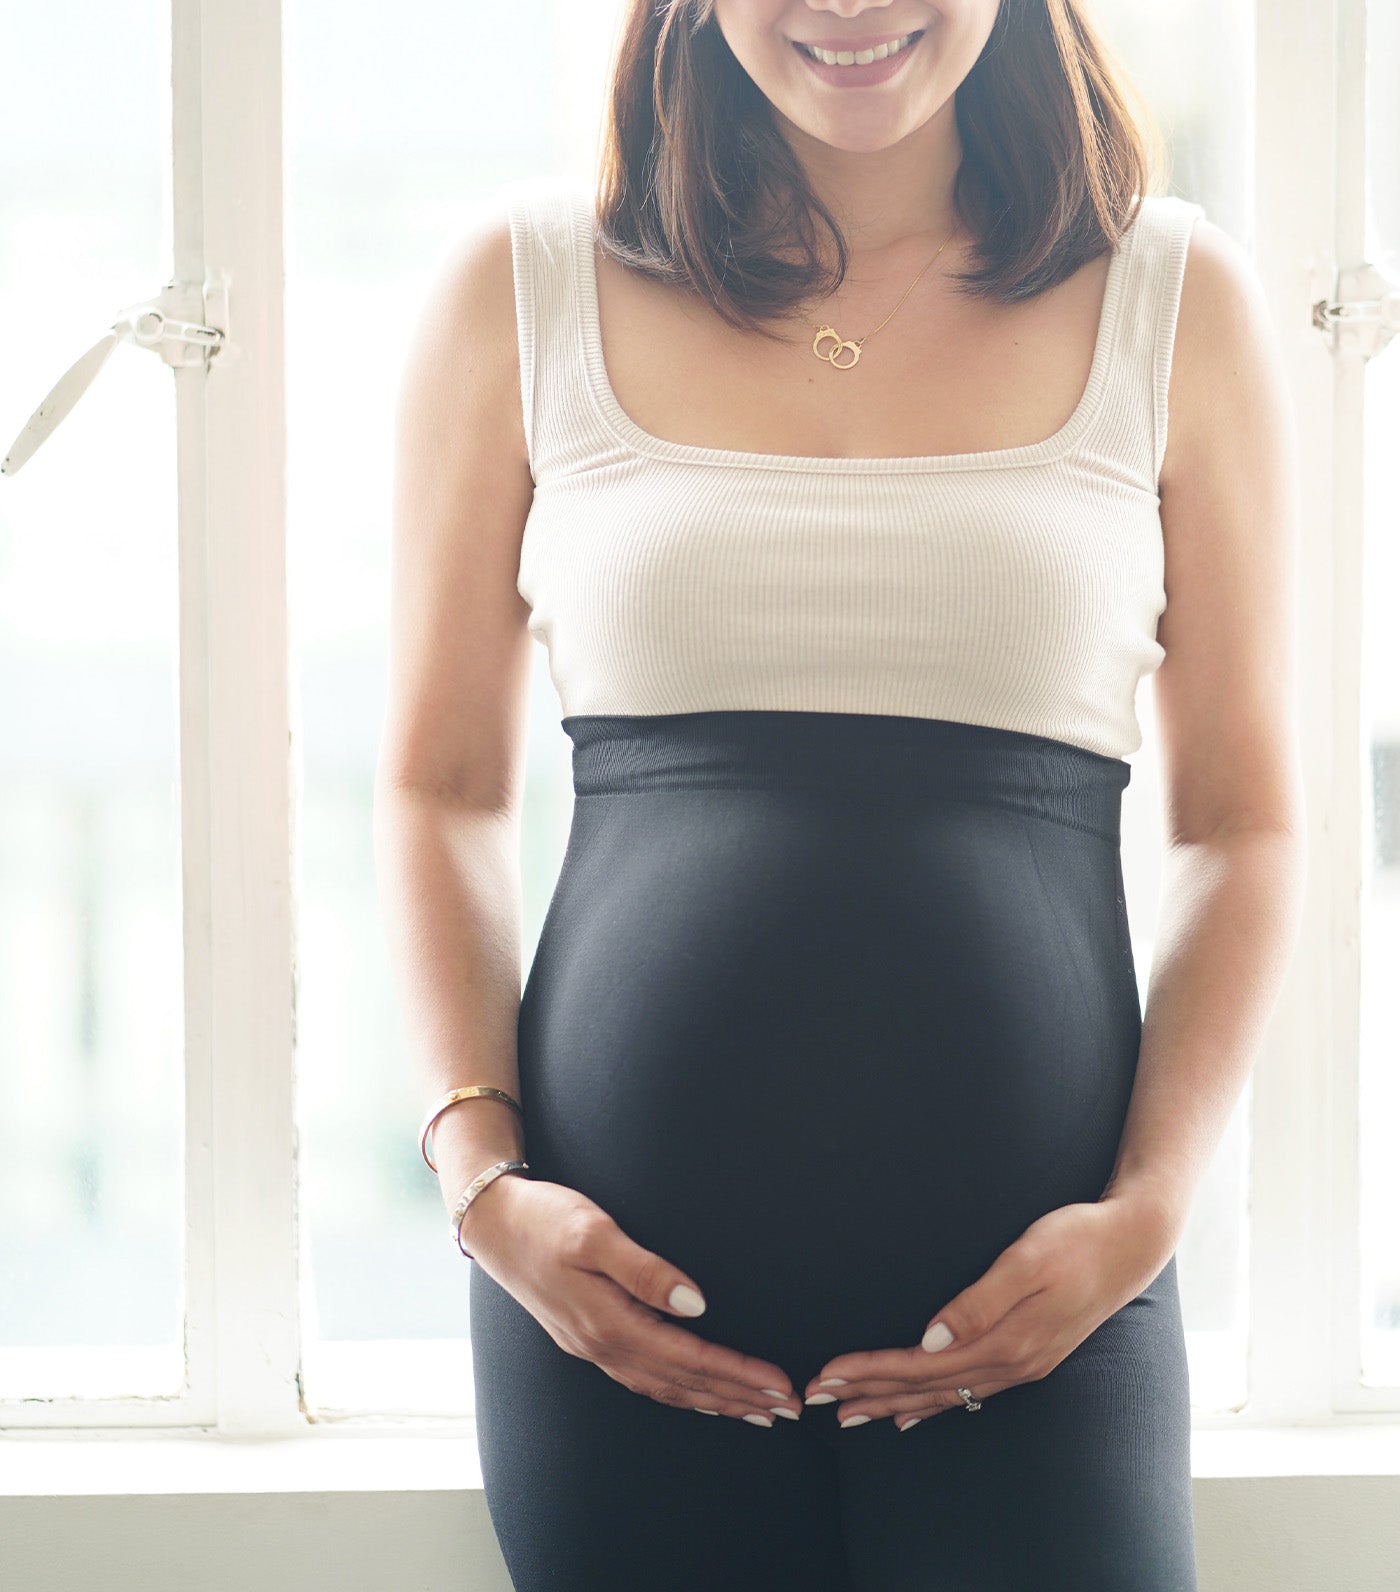 Maternity Lift and Support Leggings - Black